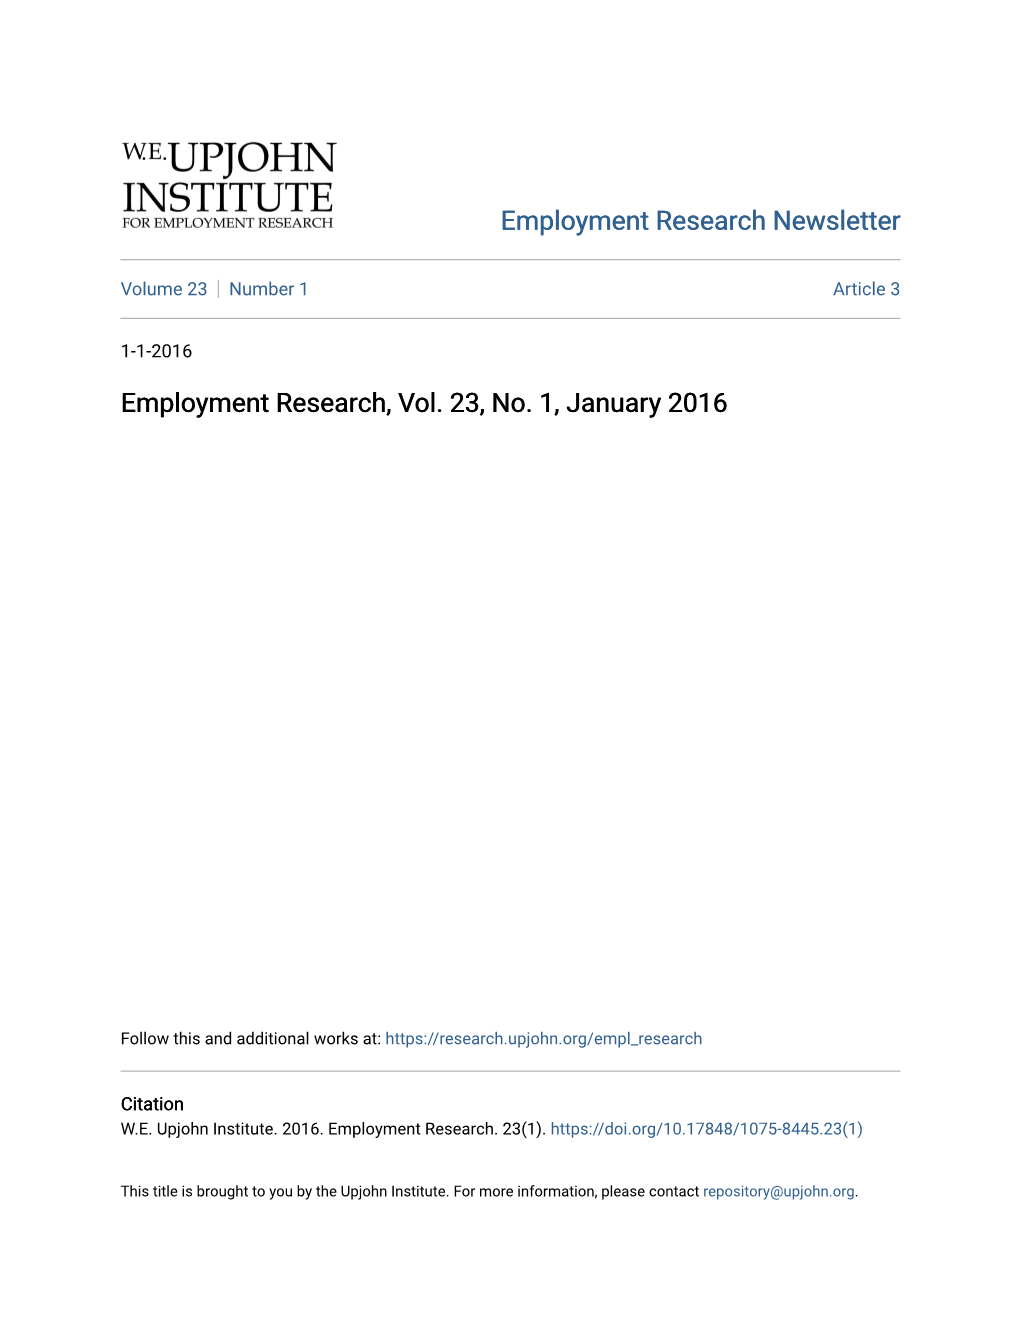 Employment Research, Vol. 23, No. 1, January 2016